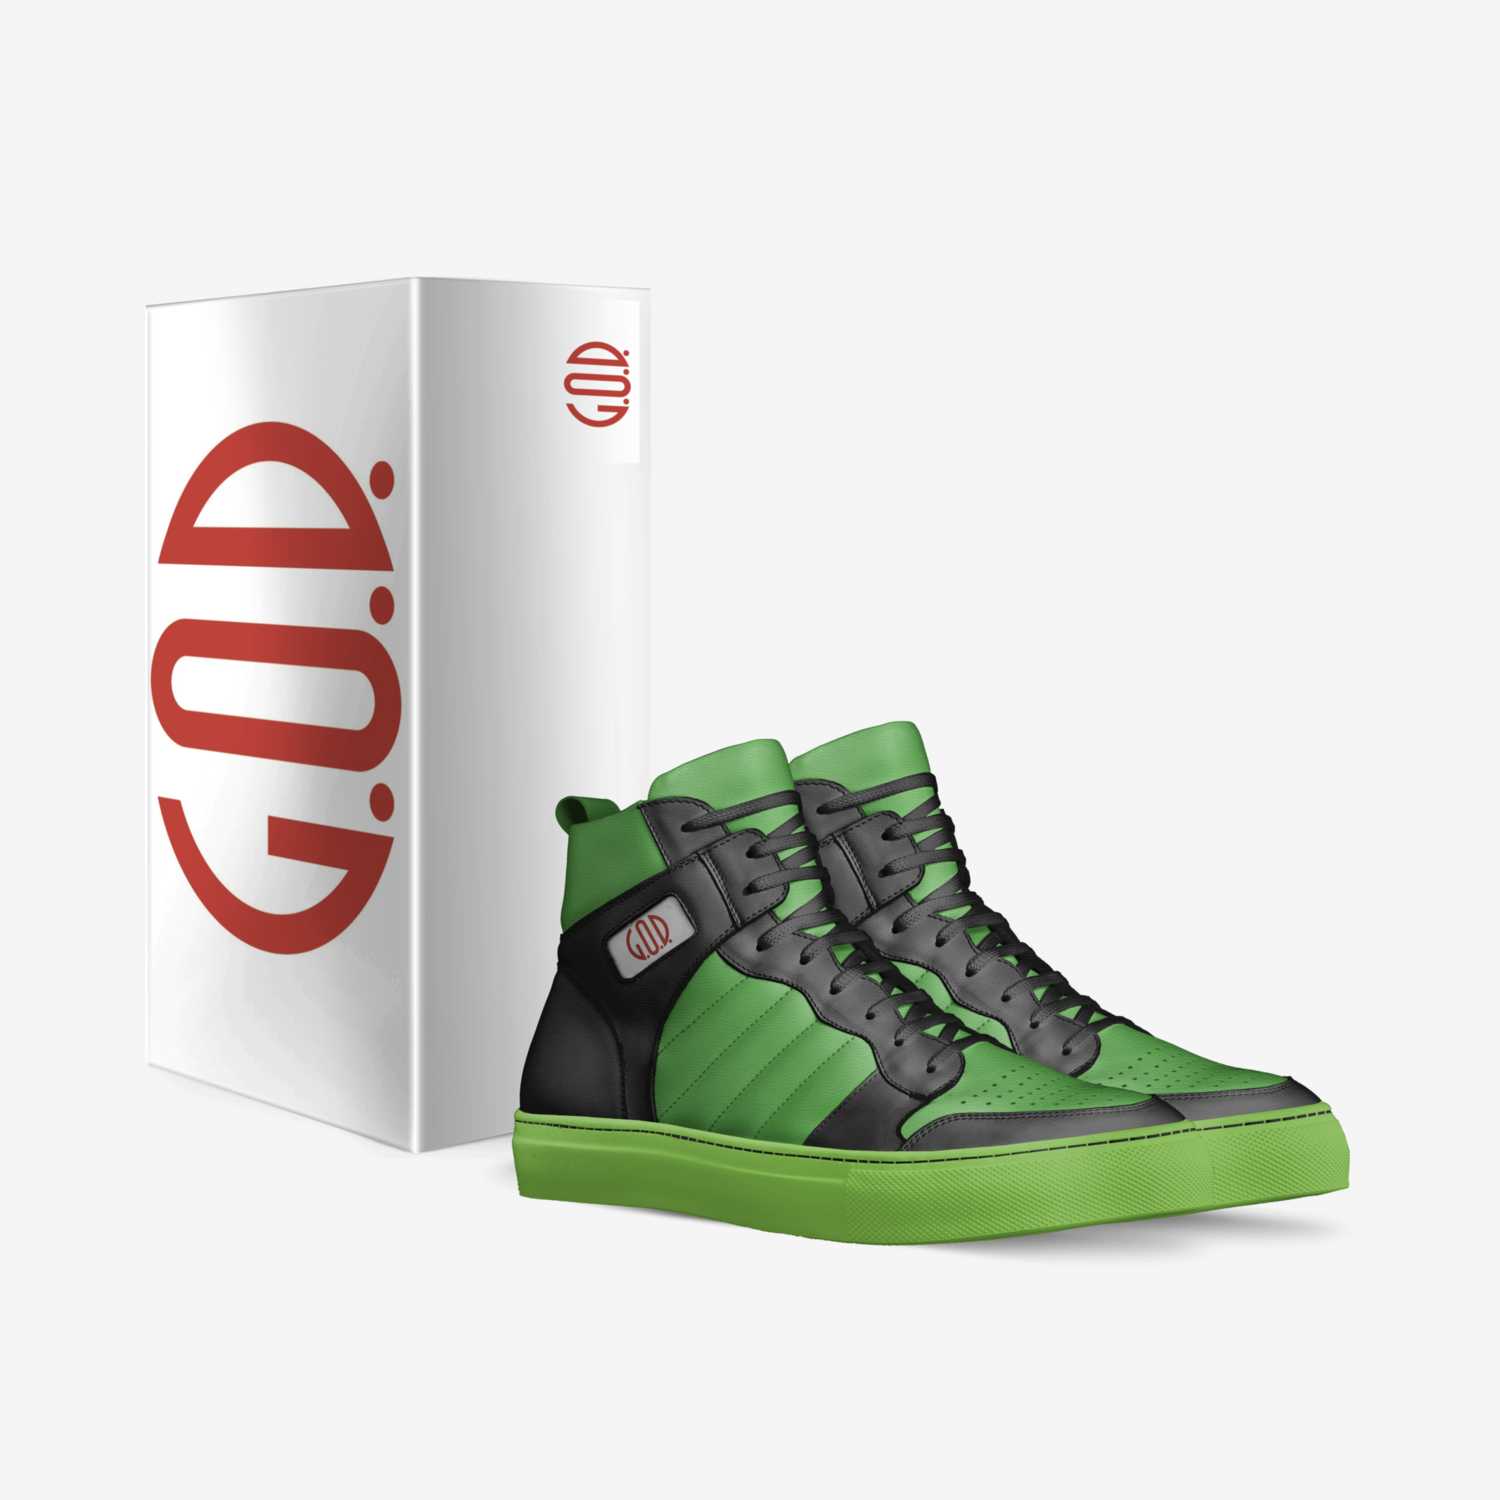 Specter custom made in Italy shoes by G.O.D. | Box view